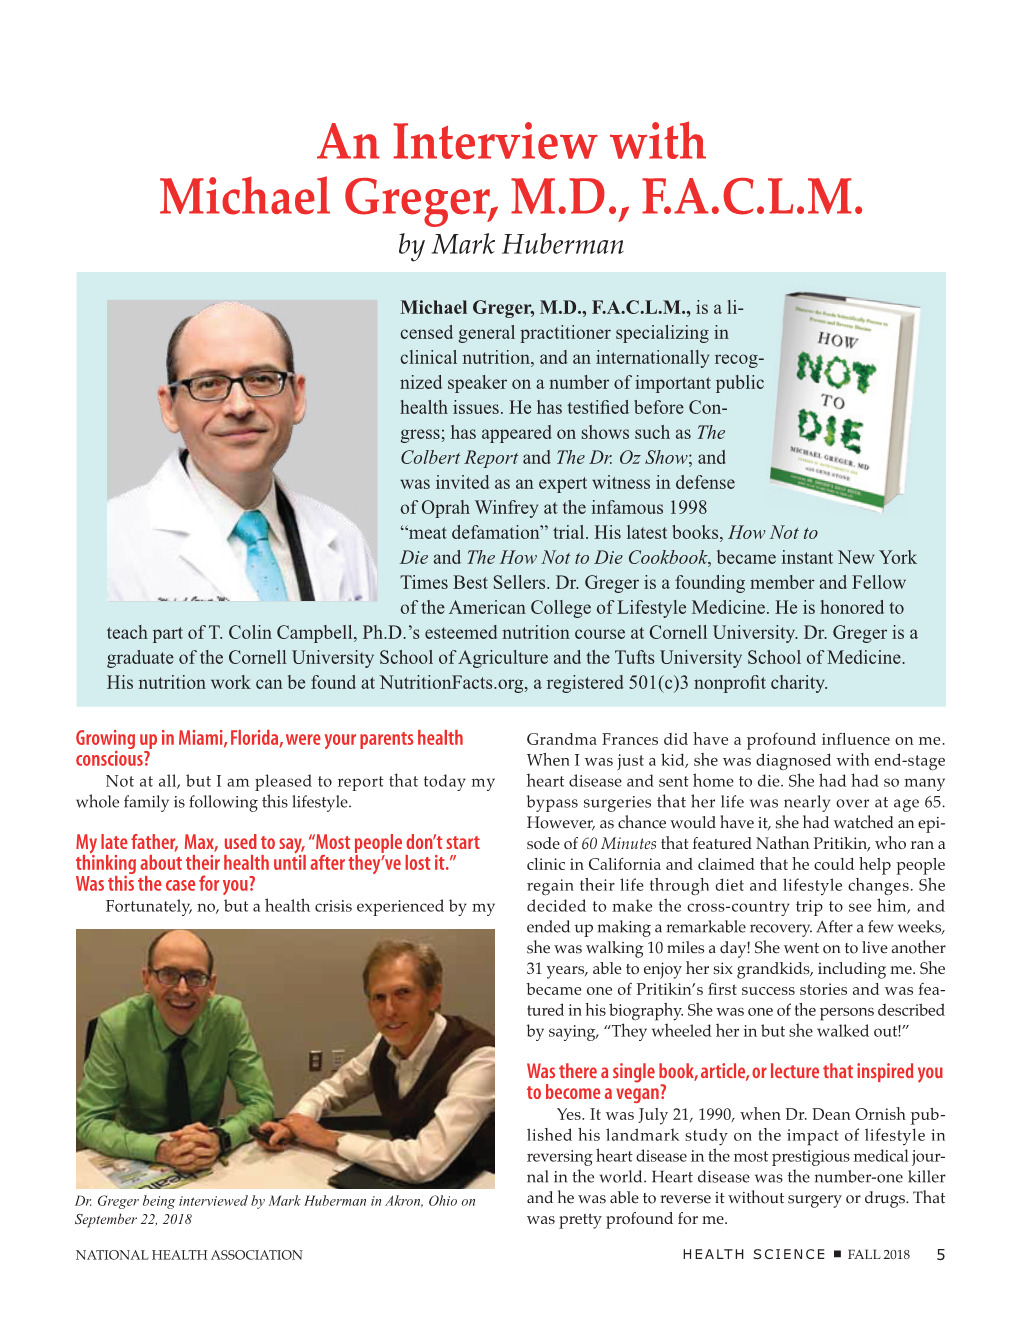 An Interview with Michael Greger, M.D., F.A.C.L.M